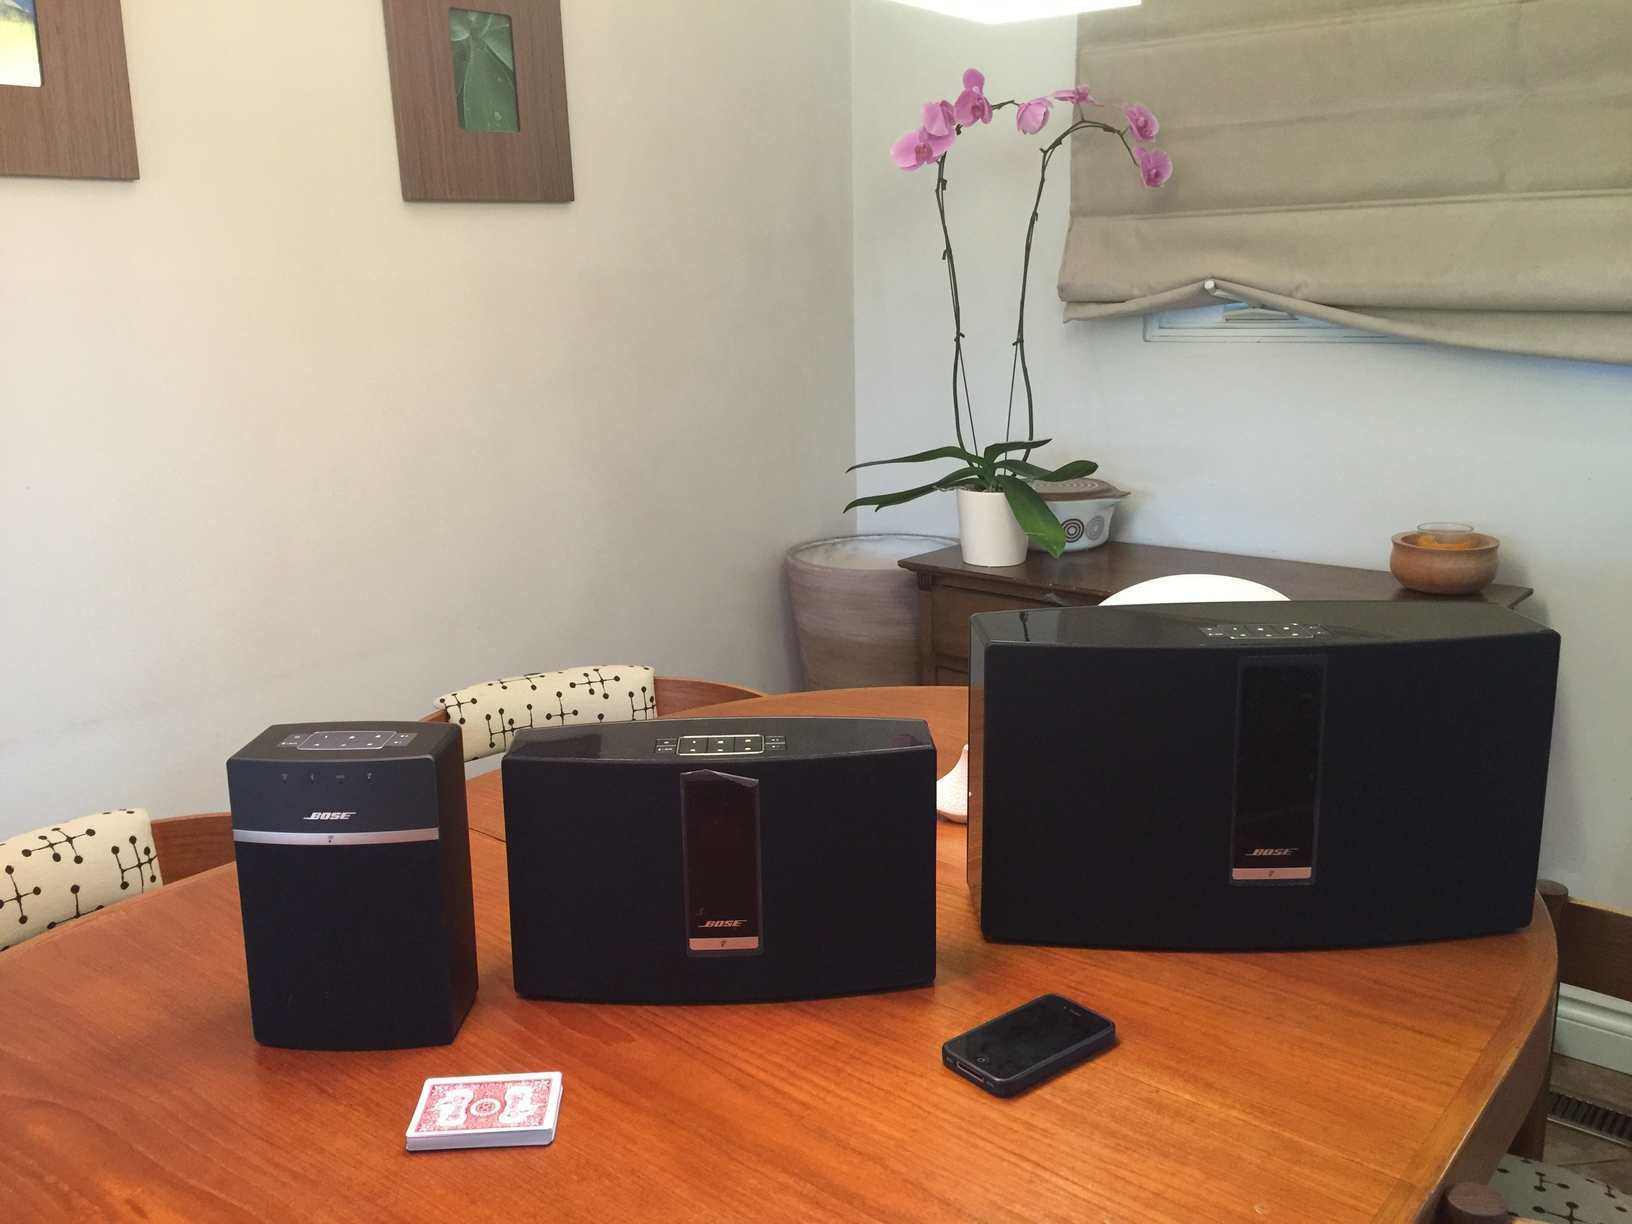 tøjlerne delikat vejviser Bose Soundtouch series: Reviewing the Soundtouch 10, 20 and 30